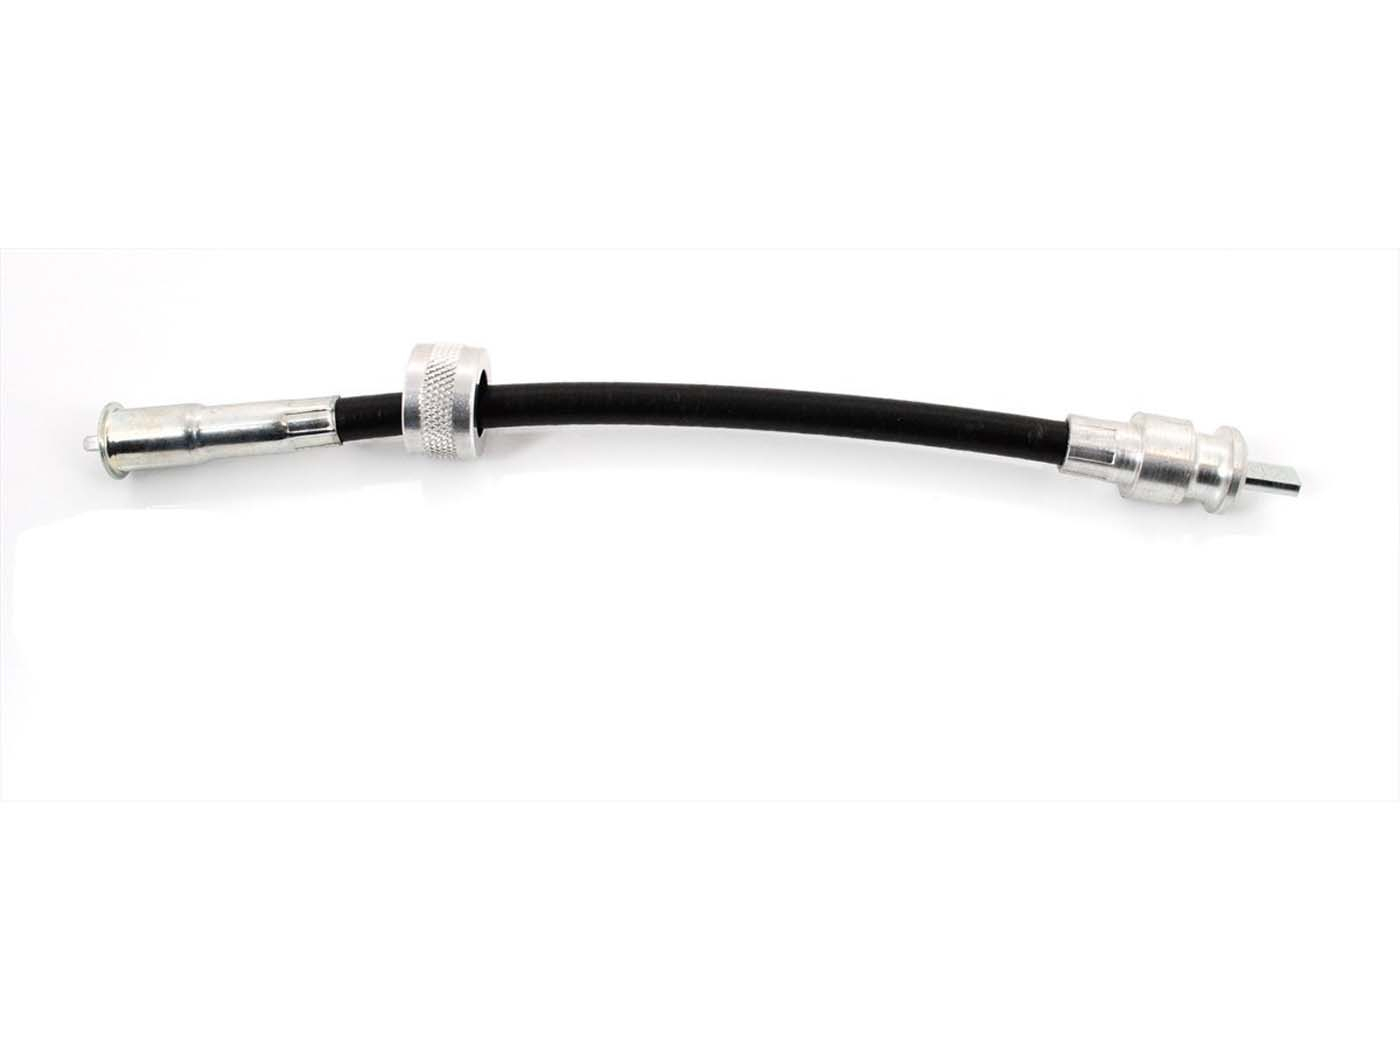 Speedometer Cable Black 680mm Sword Square New